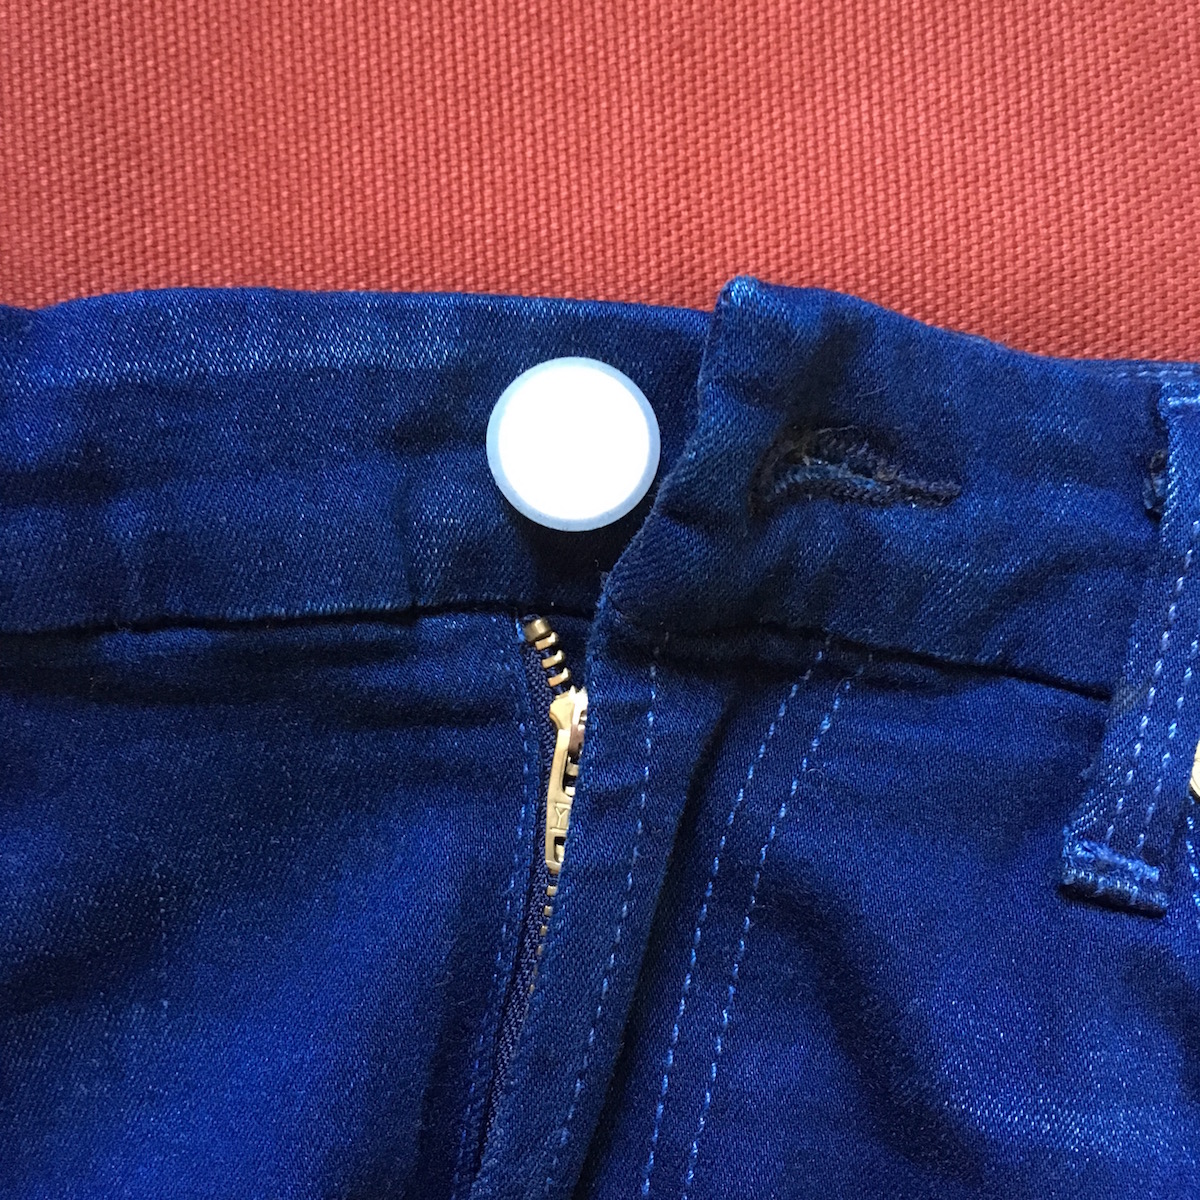 Closeup of blue jeans with Holé button cover.